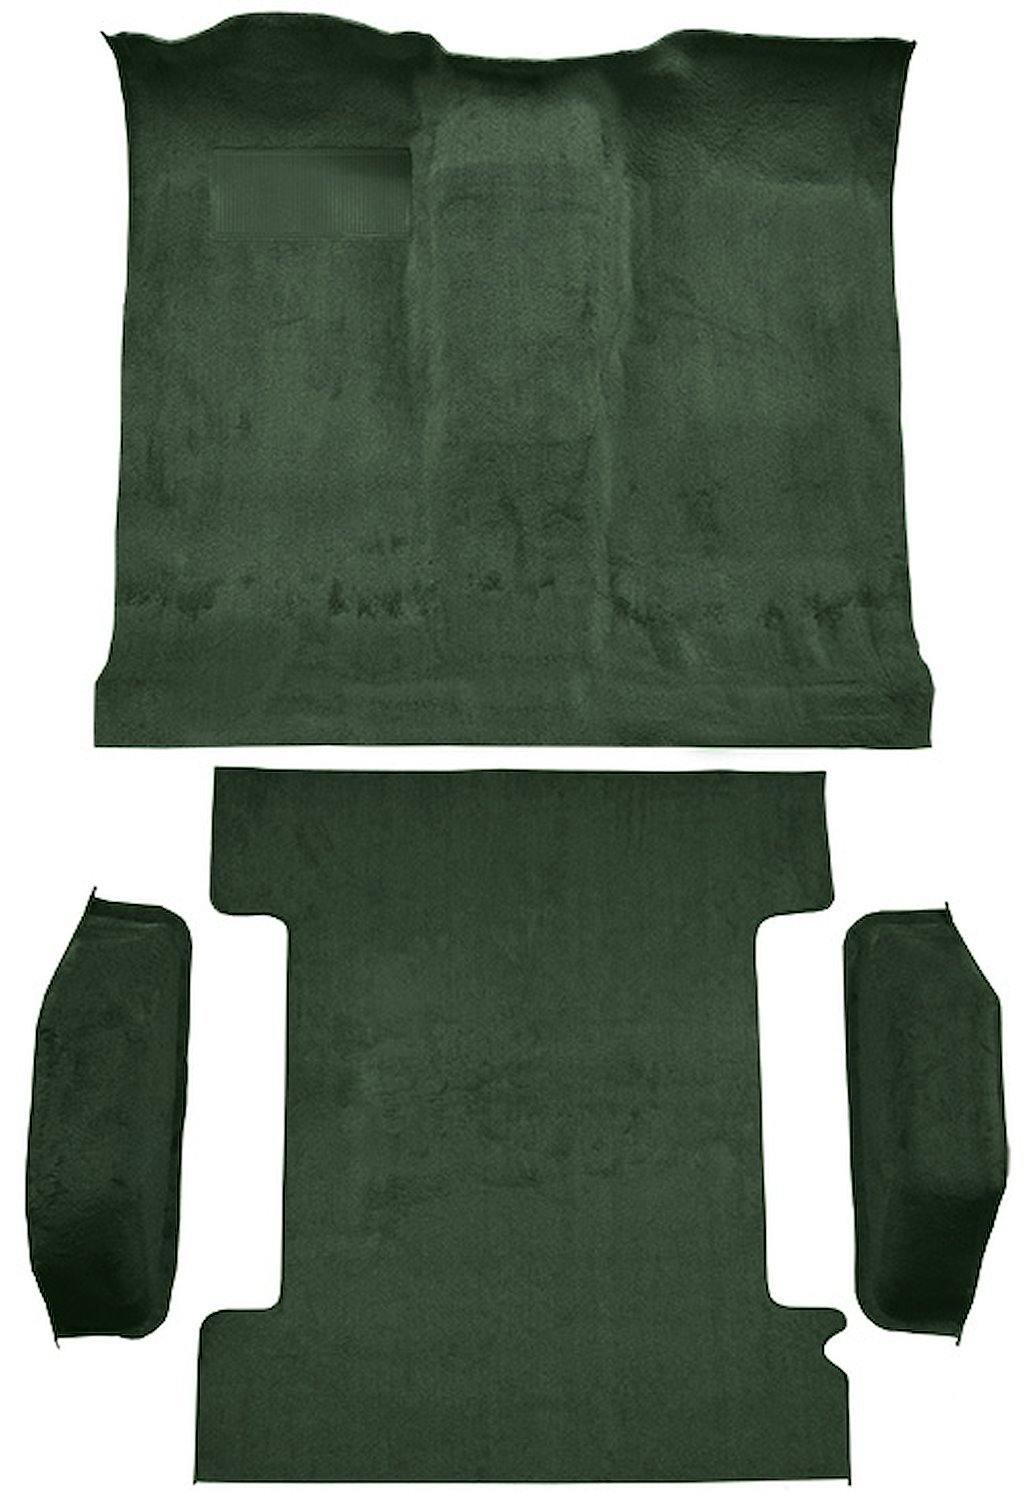 Molded Loop Passenger and Cargo Area Carpet for 1973 Chevrolet Blazer, GMC Jimmy [OE-Style Jute Backing, 4-Piece, Dark Green]